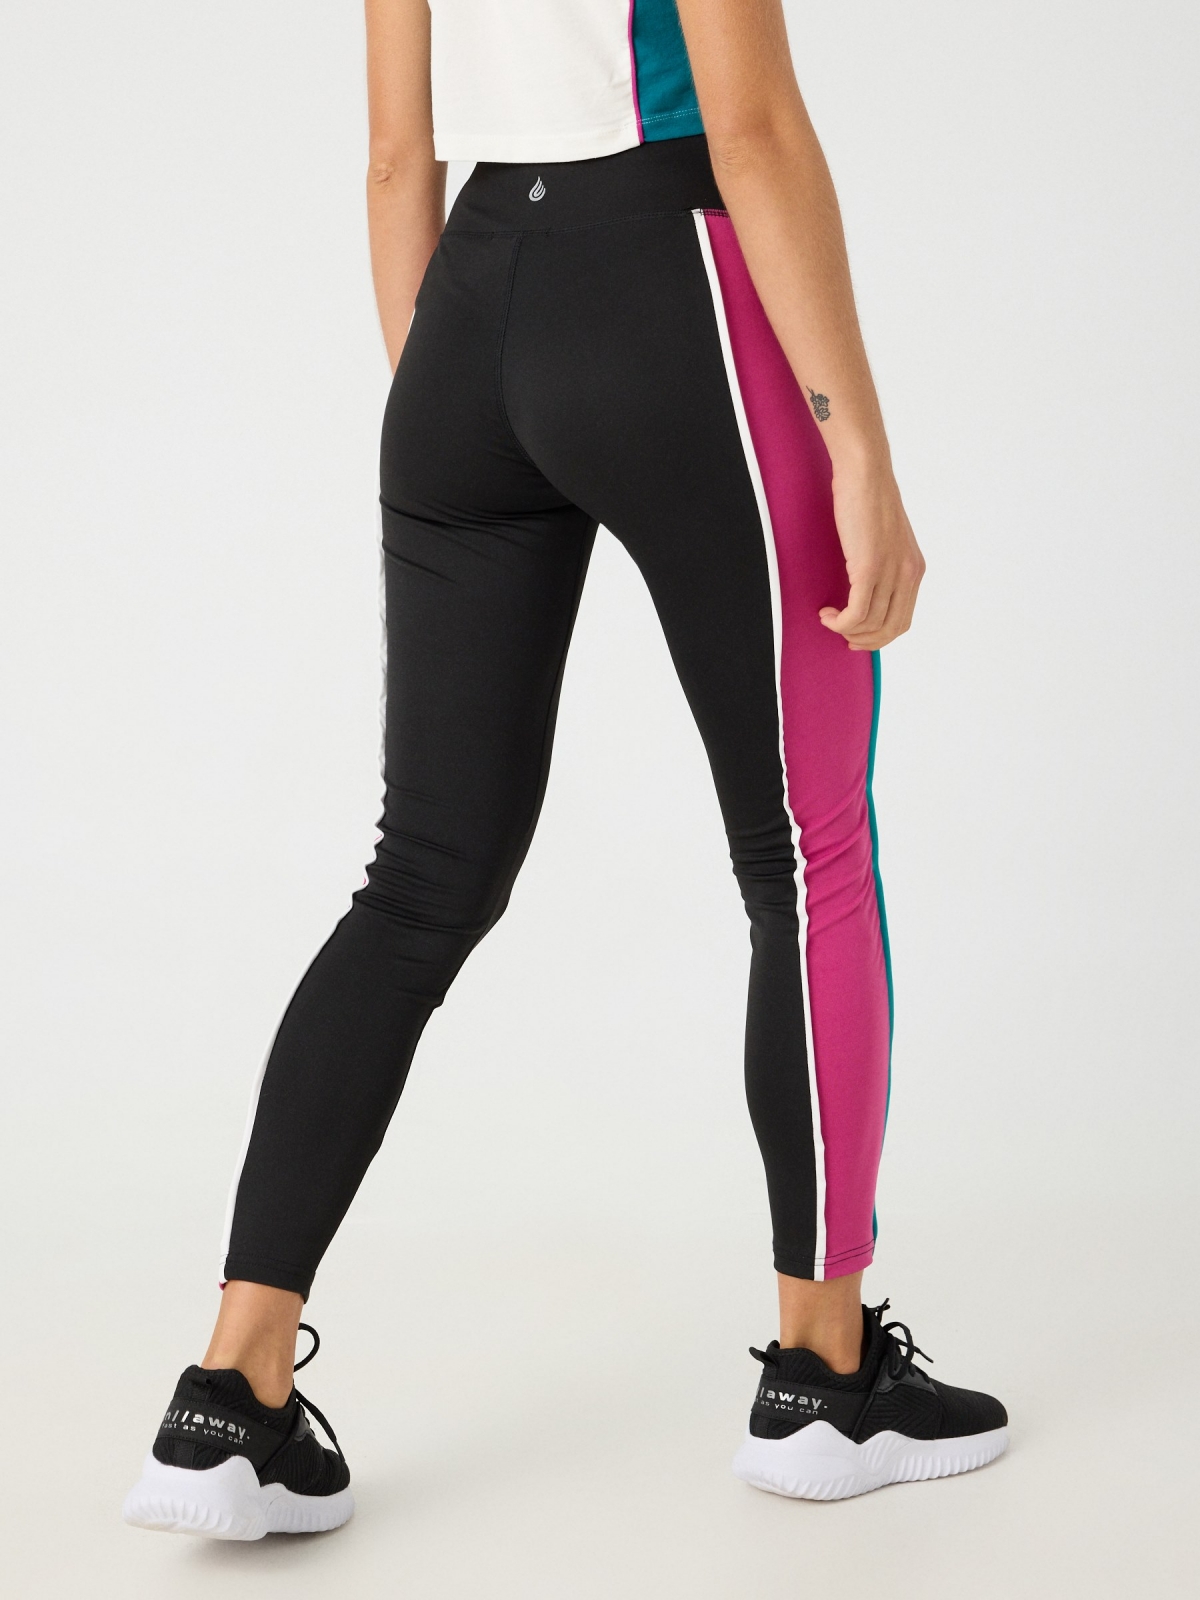 Leggings Fit for life black middle back view